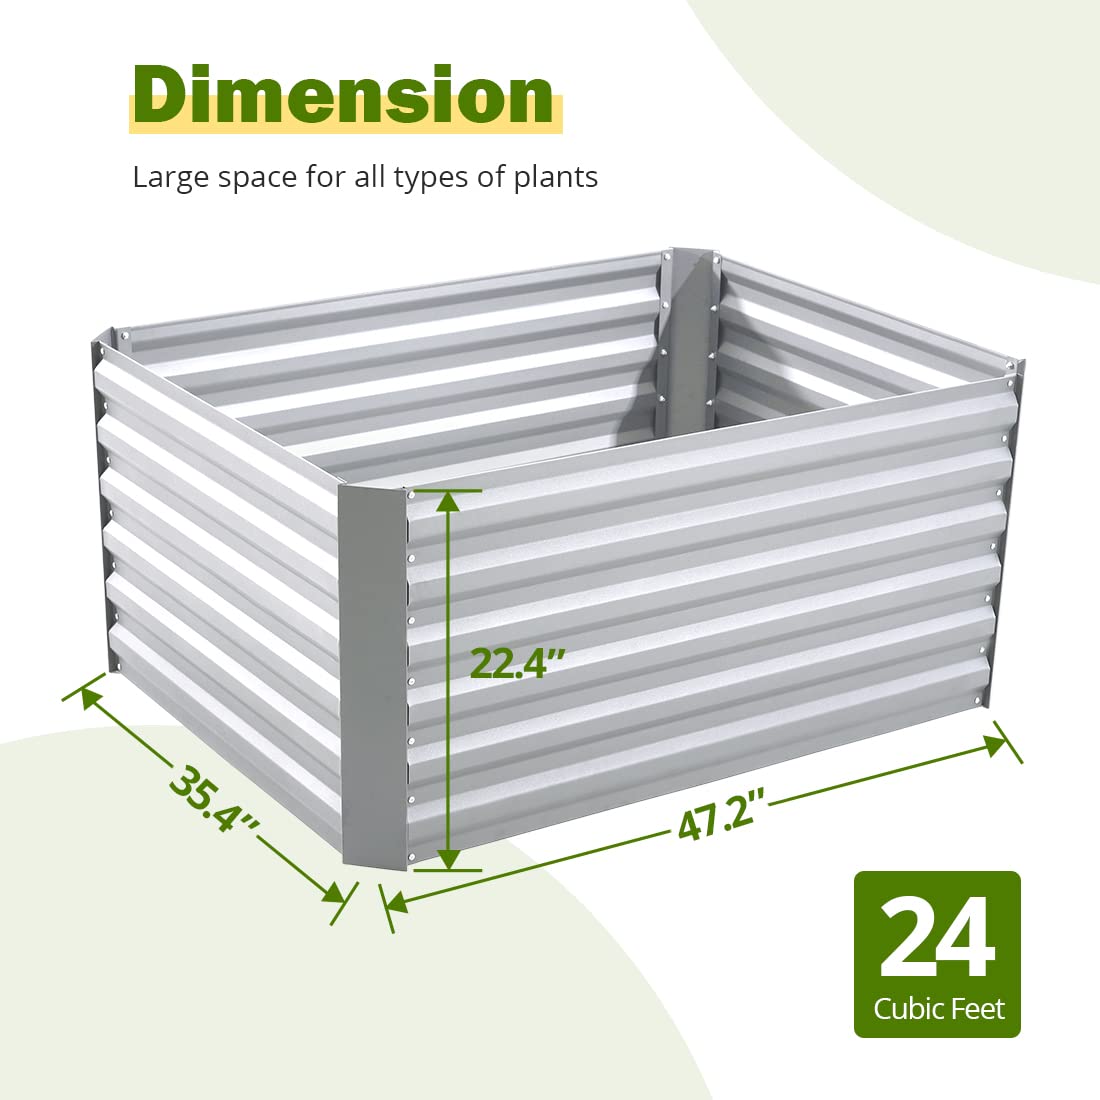 4x3x2ft garden bed dimension#size_4x3x2ft